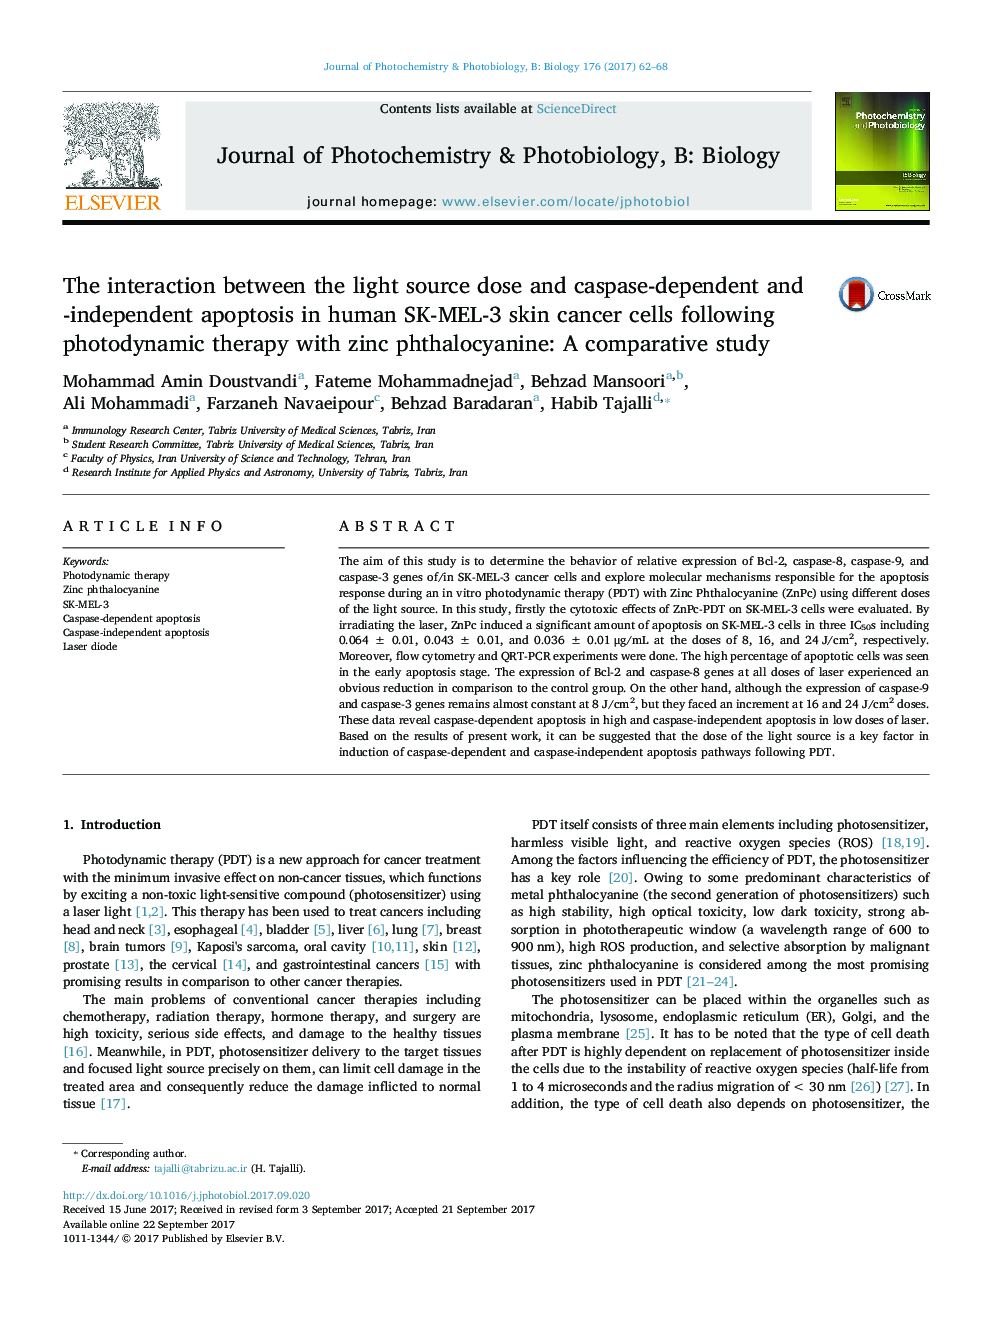 The interaction between the light source dose and caspase-dependent and -independent apoptosis in human SK-MEL-3 skin cancer cells following photodynamic therapy with zinc phthalocyanine: A comparative study